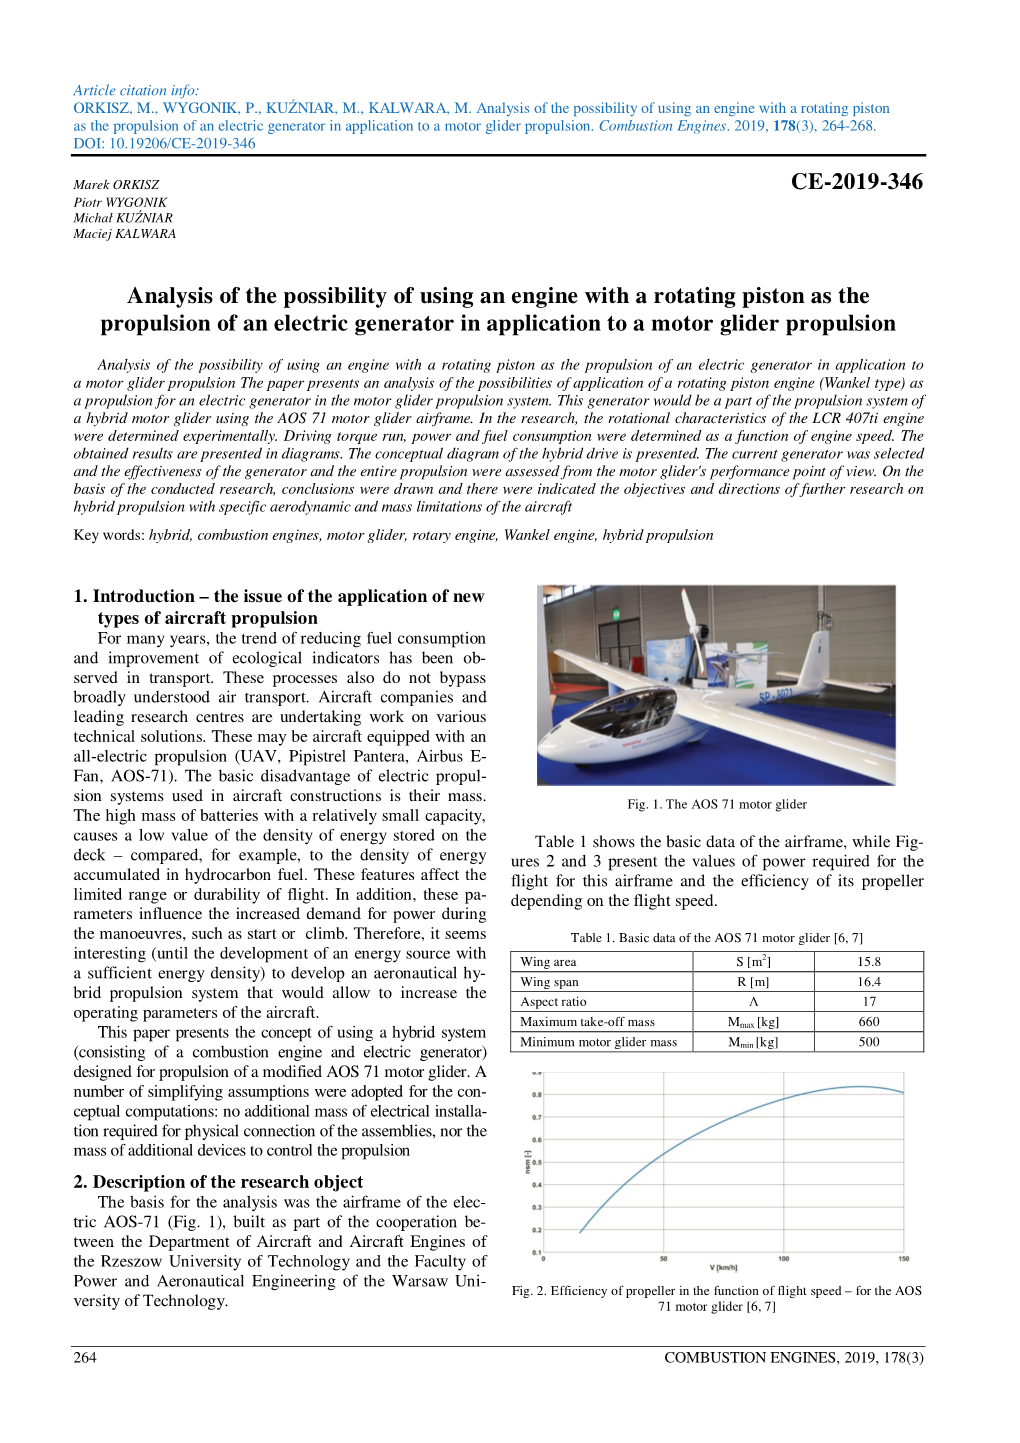 CE-2019-346 Analysis of the Possibility of Using an Engine with a Rotating Piston As the Propulsion of an Electric Generator In